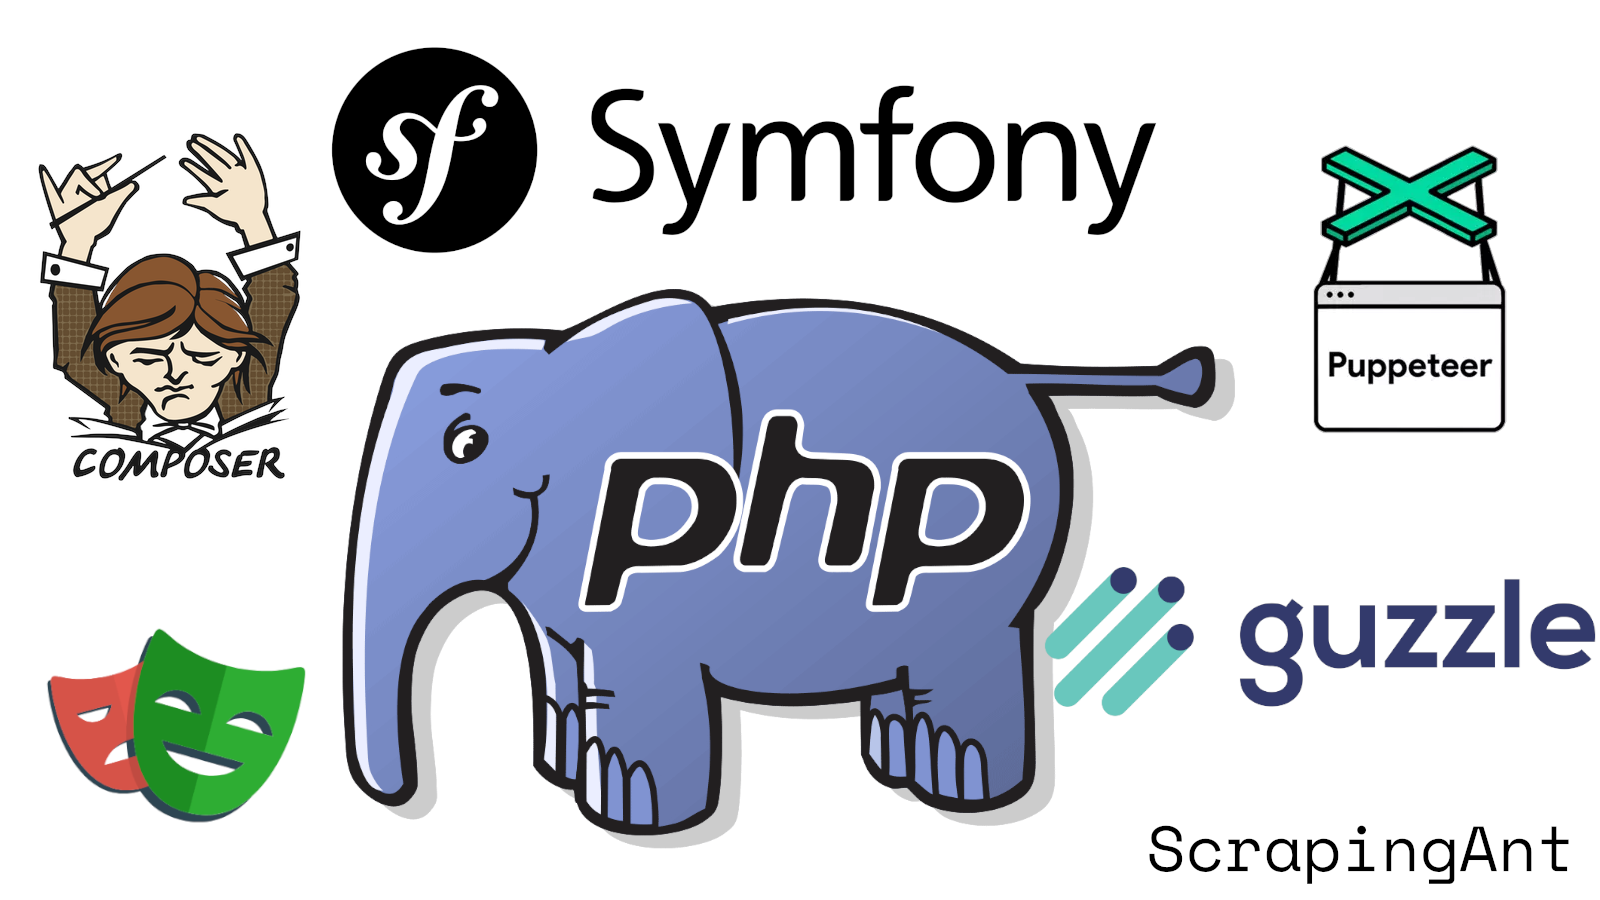 Web Scraping with PHP - A Starter Guide